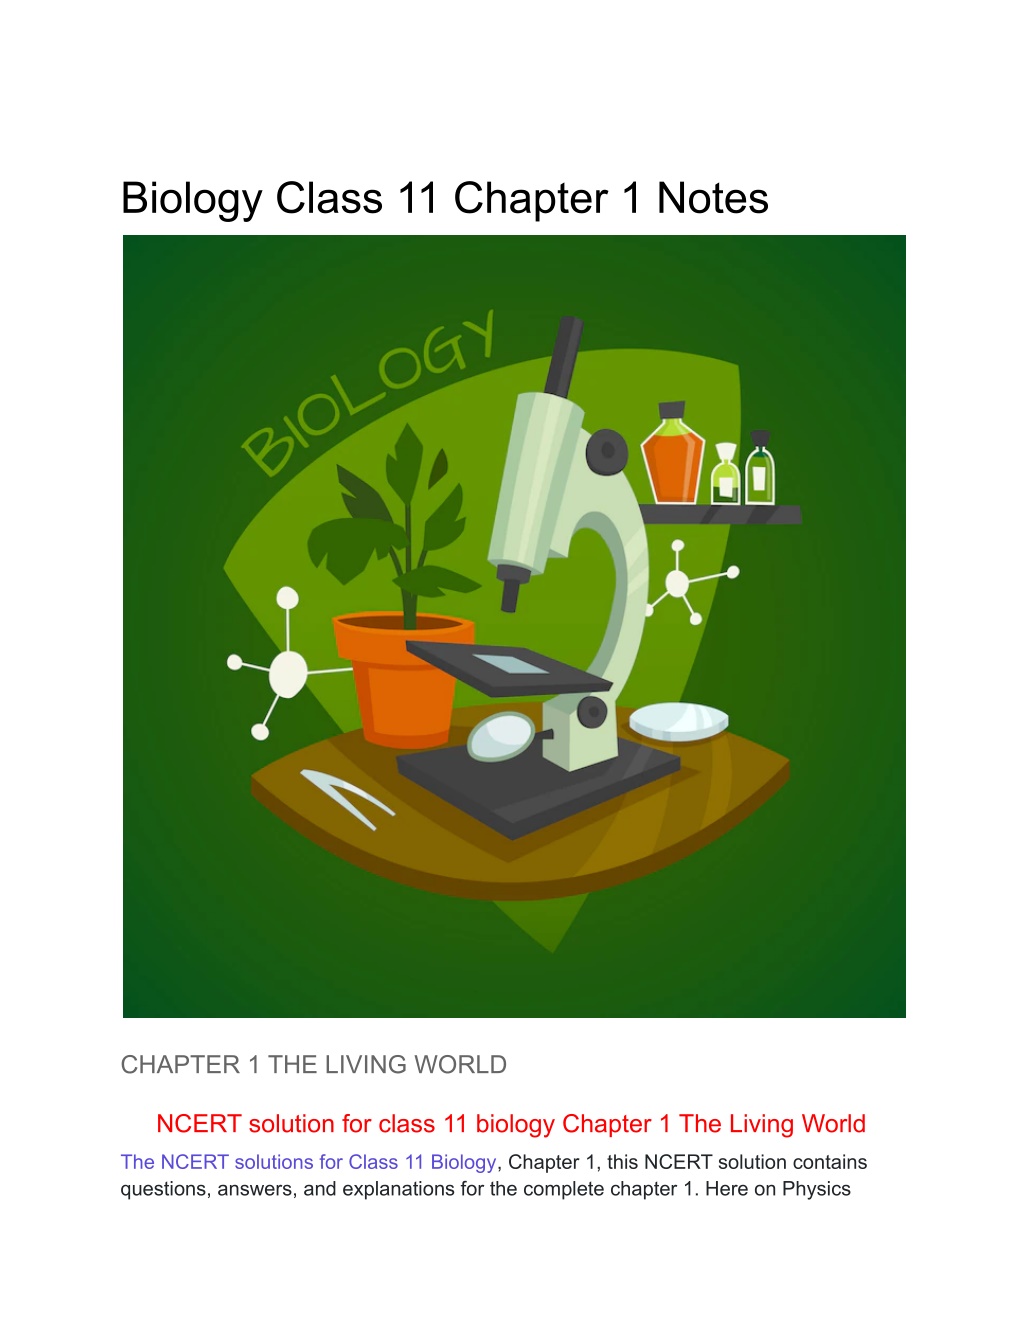 Ppt Biology Class 11 Chapter 1 Notes Powerpoint Presentation Free Download Id 11721553